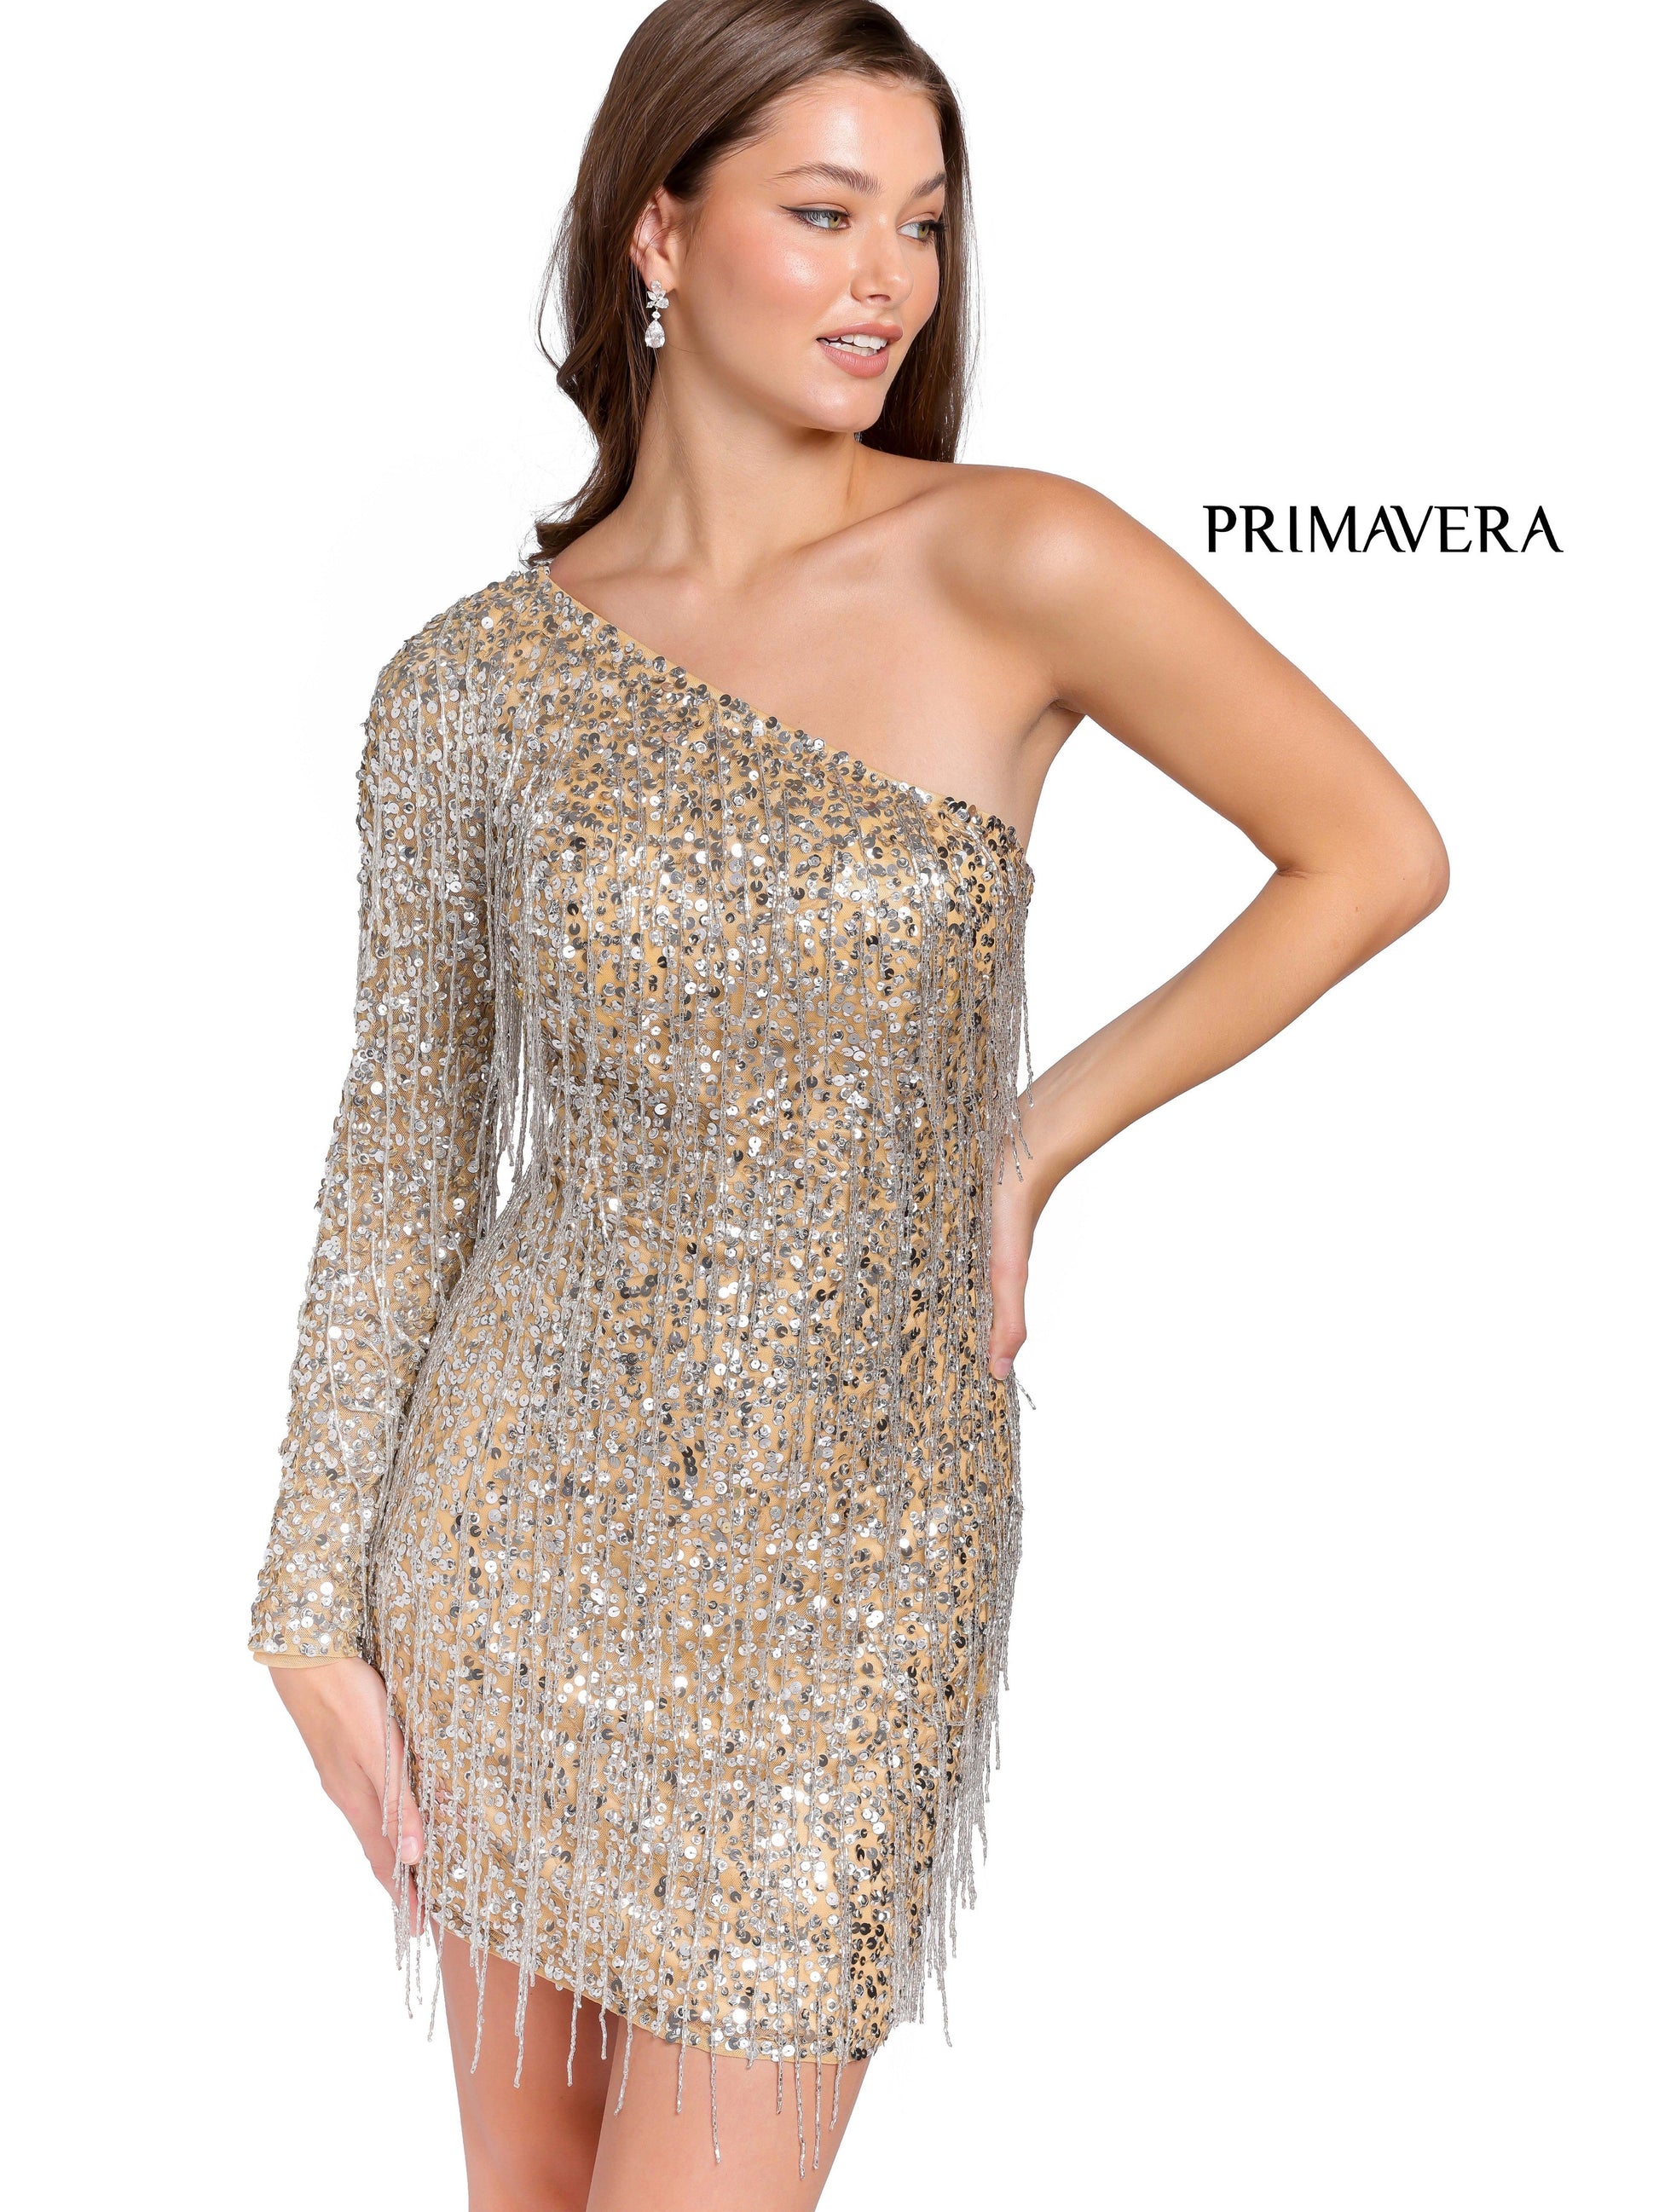 Primavera Couture 3858 Short 2022 Homecoming dress Fitted sequin beaded short cocktail dress  Available Color- Nude Silver  Available Size- 0